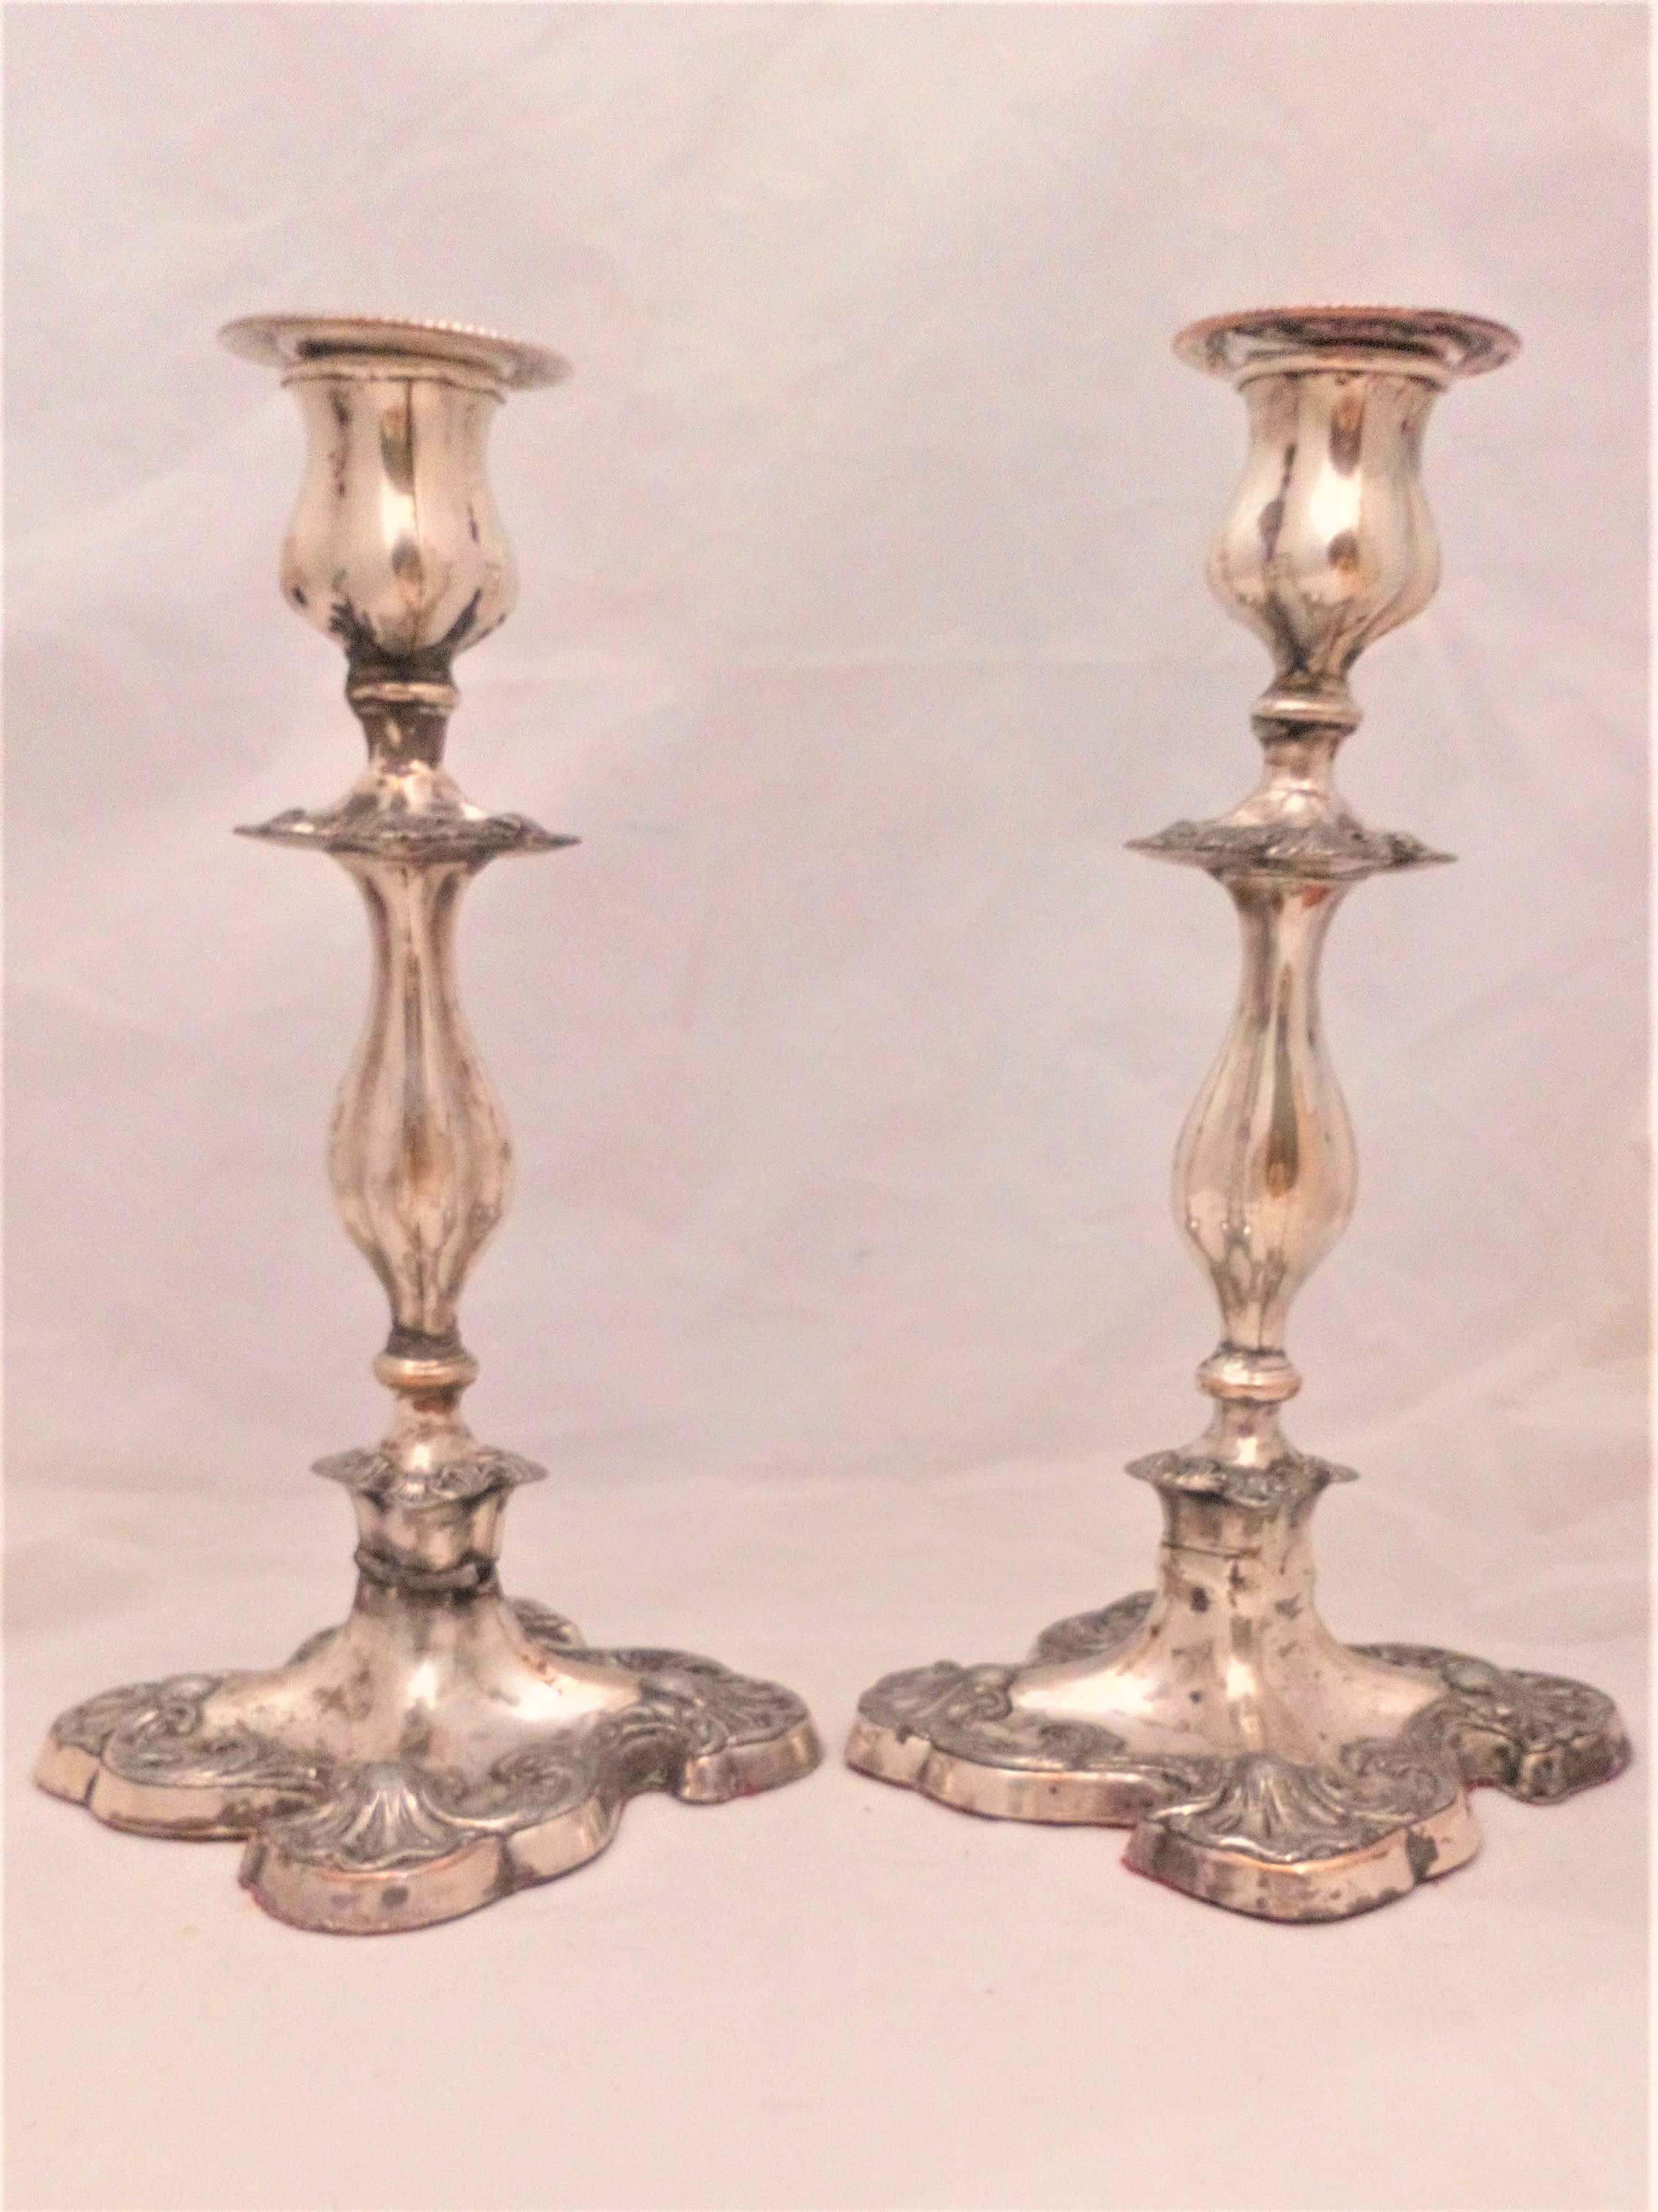 Antique pair of silver plated pair candlesticks shell scrolls rococo revival Victorian circa 1840